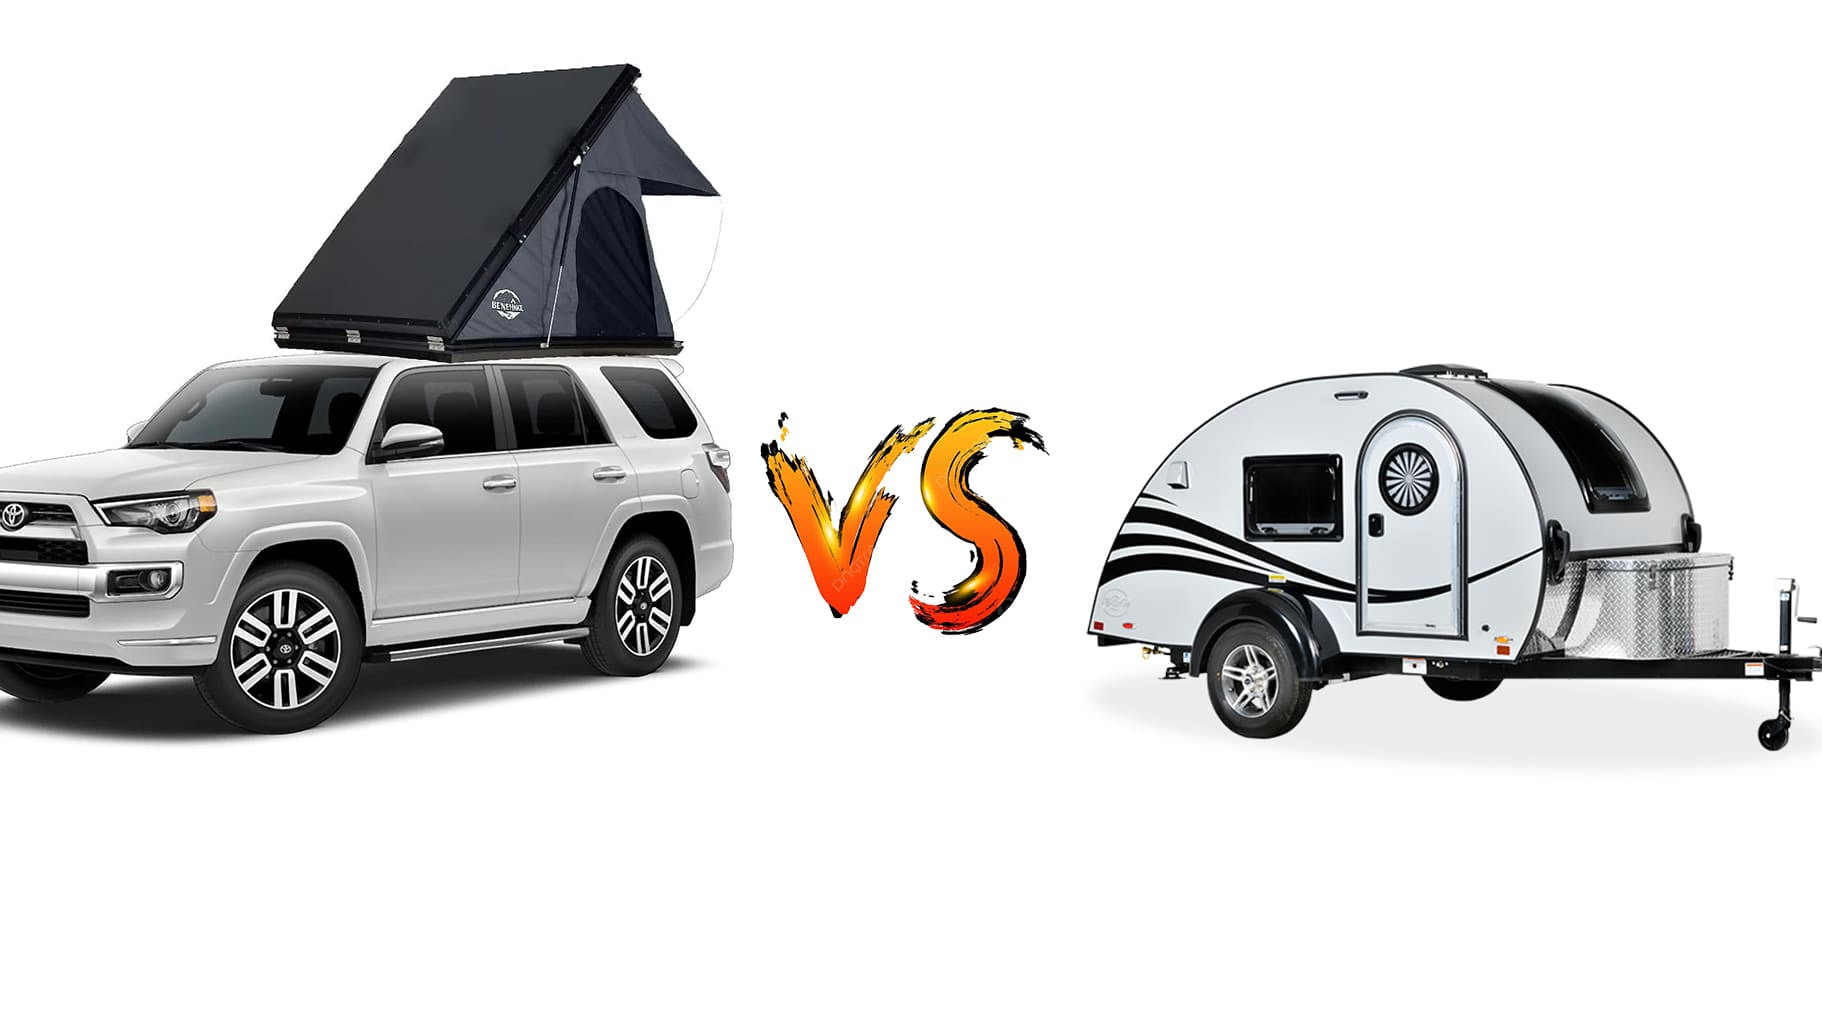 Rooftop Tents vs Camper Trailers: Which is Best for Your Camping Adventure?